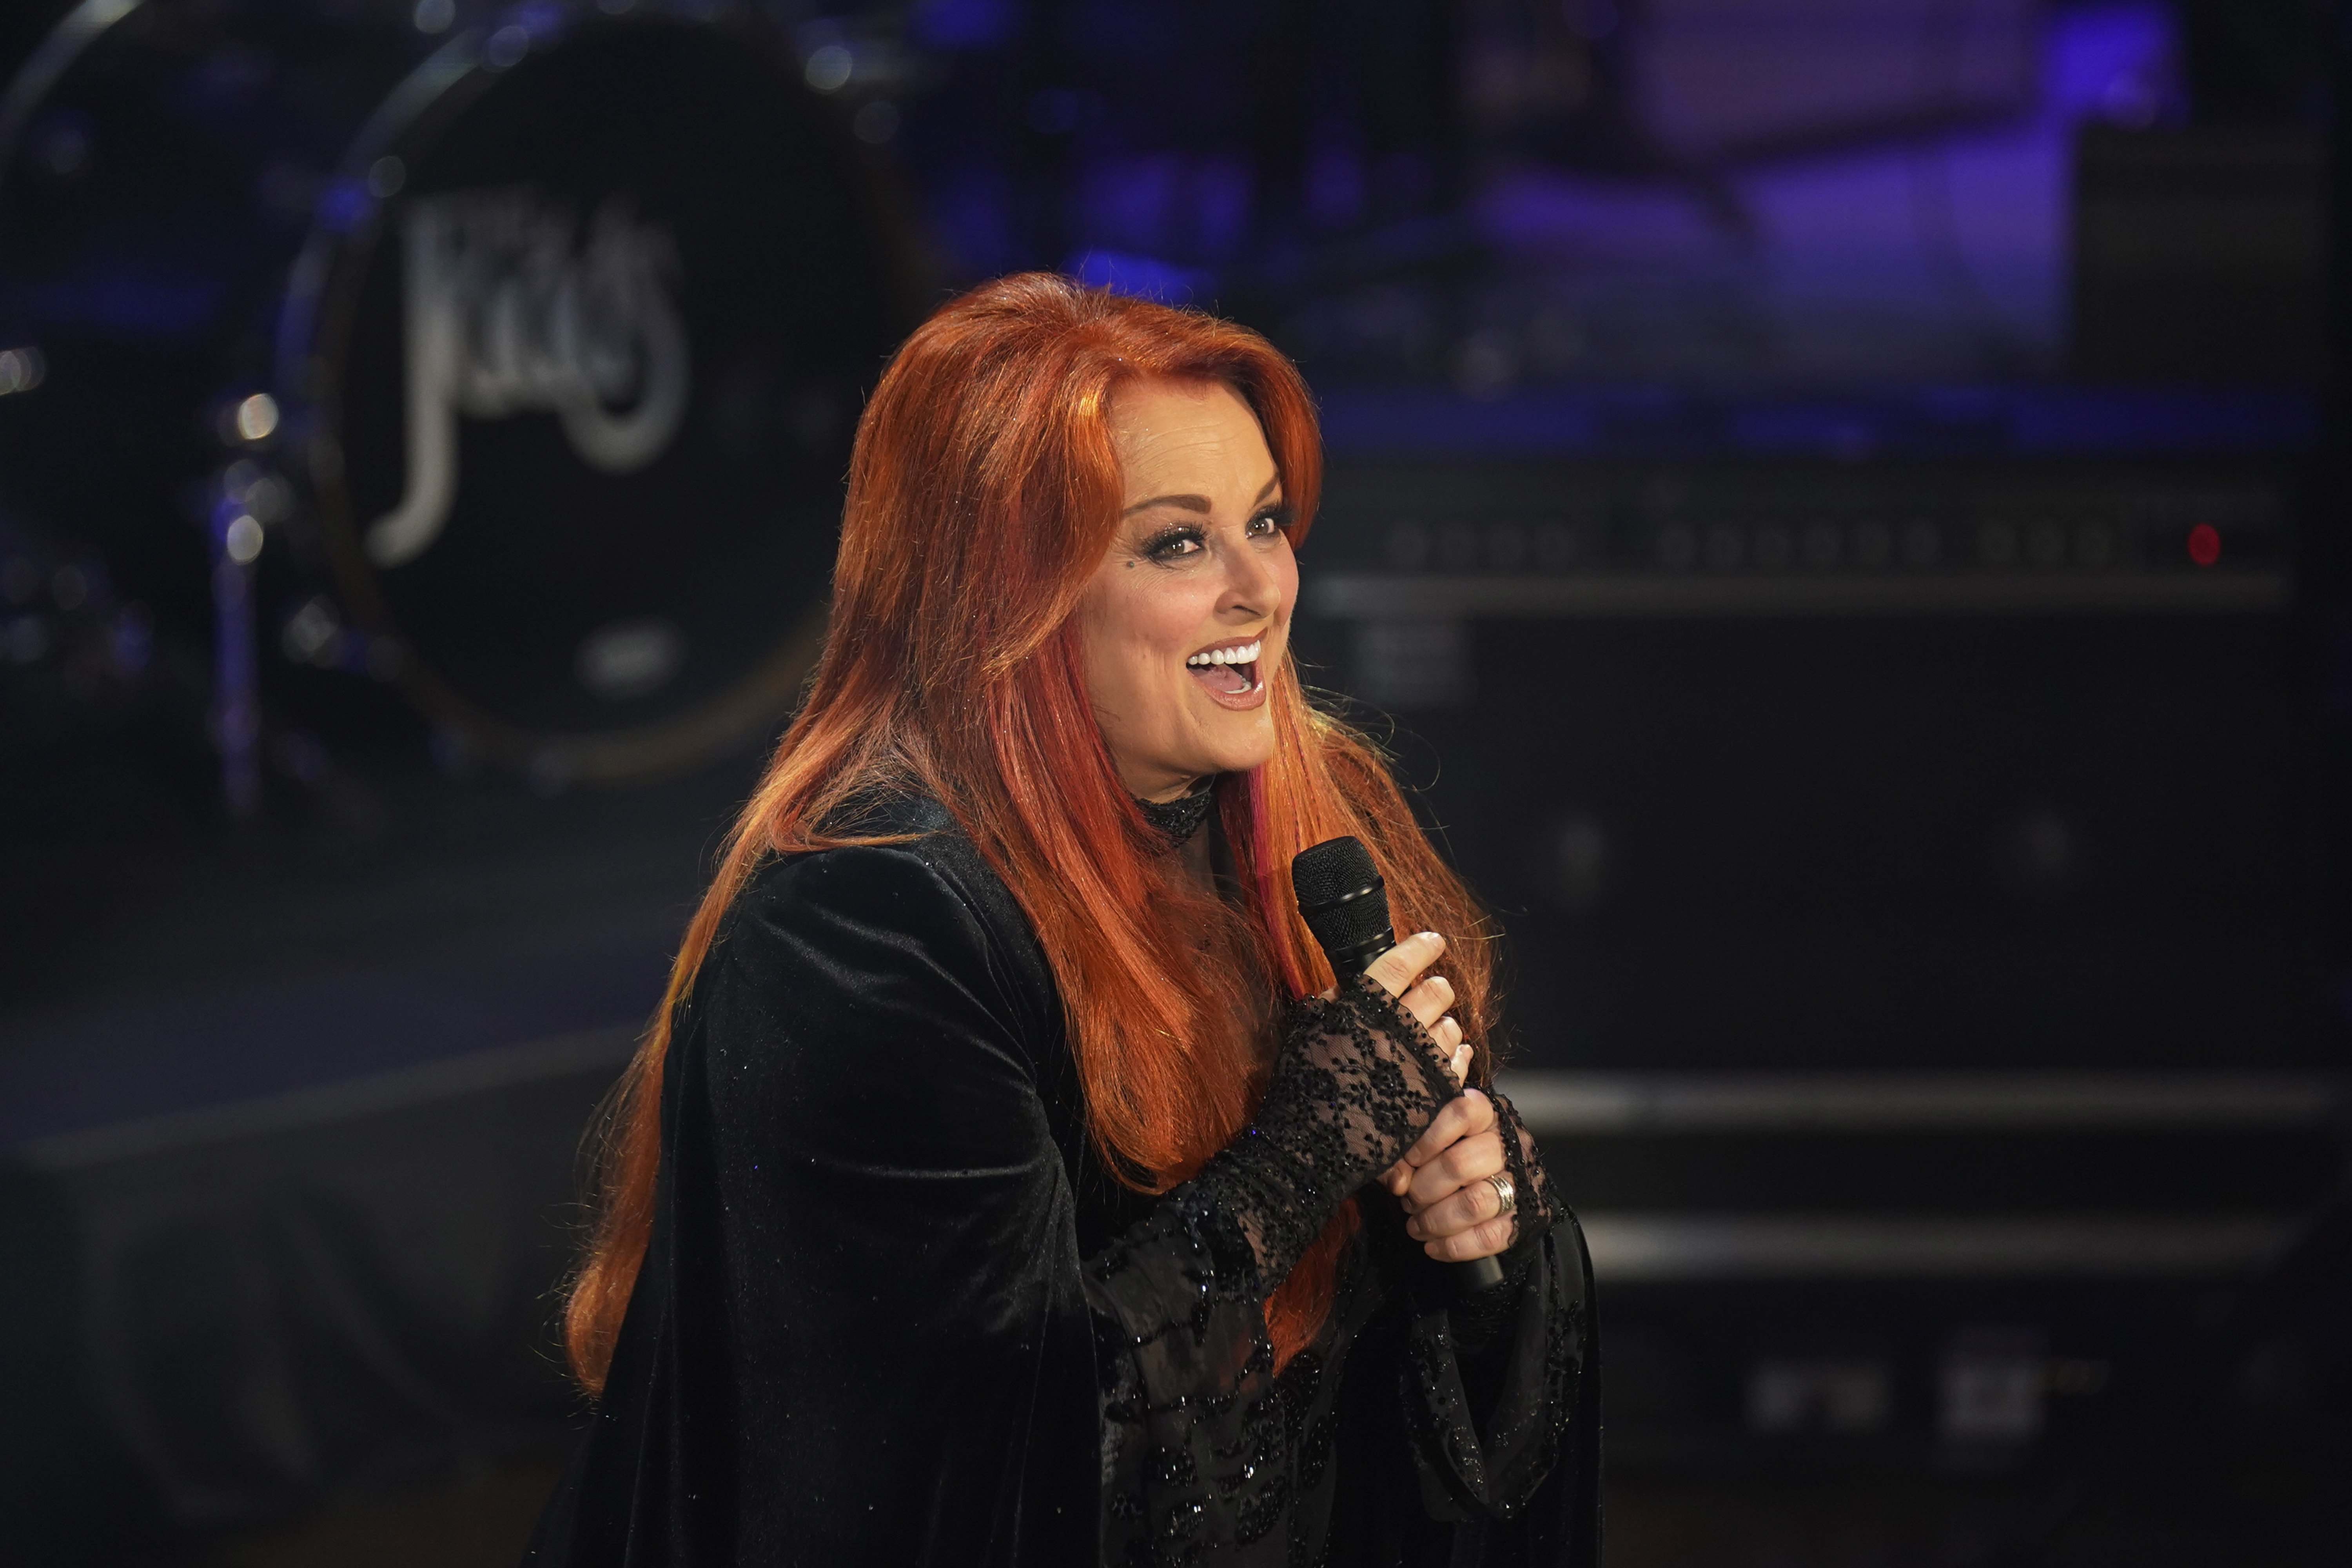 Wynonna Judd performs onstage during Naomi Judd: 'A River Of Time' Celebration at Ryman Auditorium on May 15, 2022 in Nashville, Tennessee. | Source: Getty Images